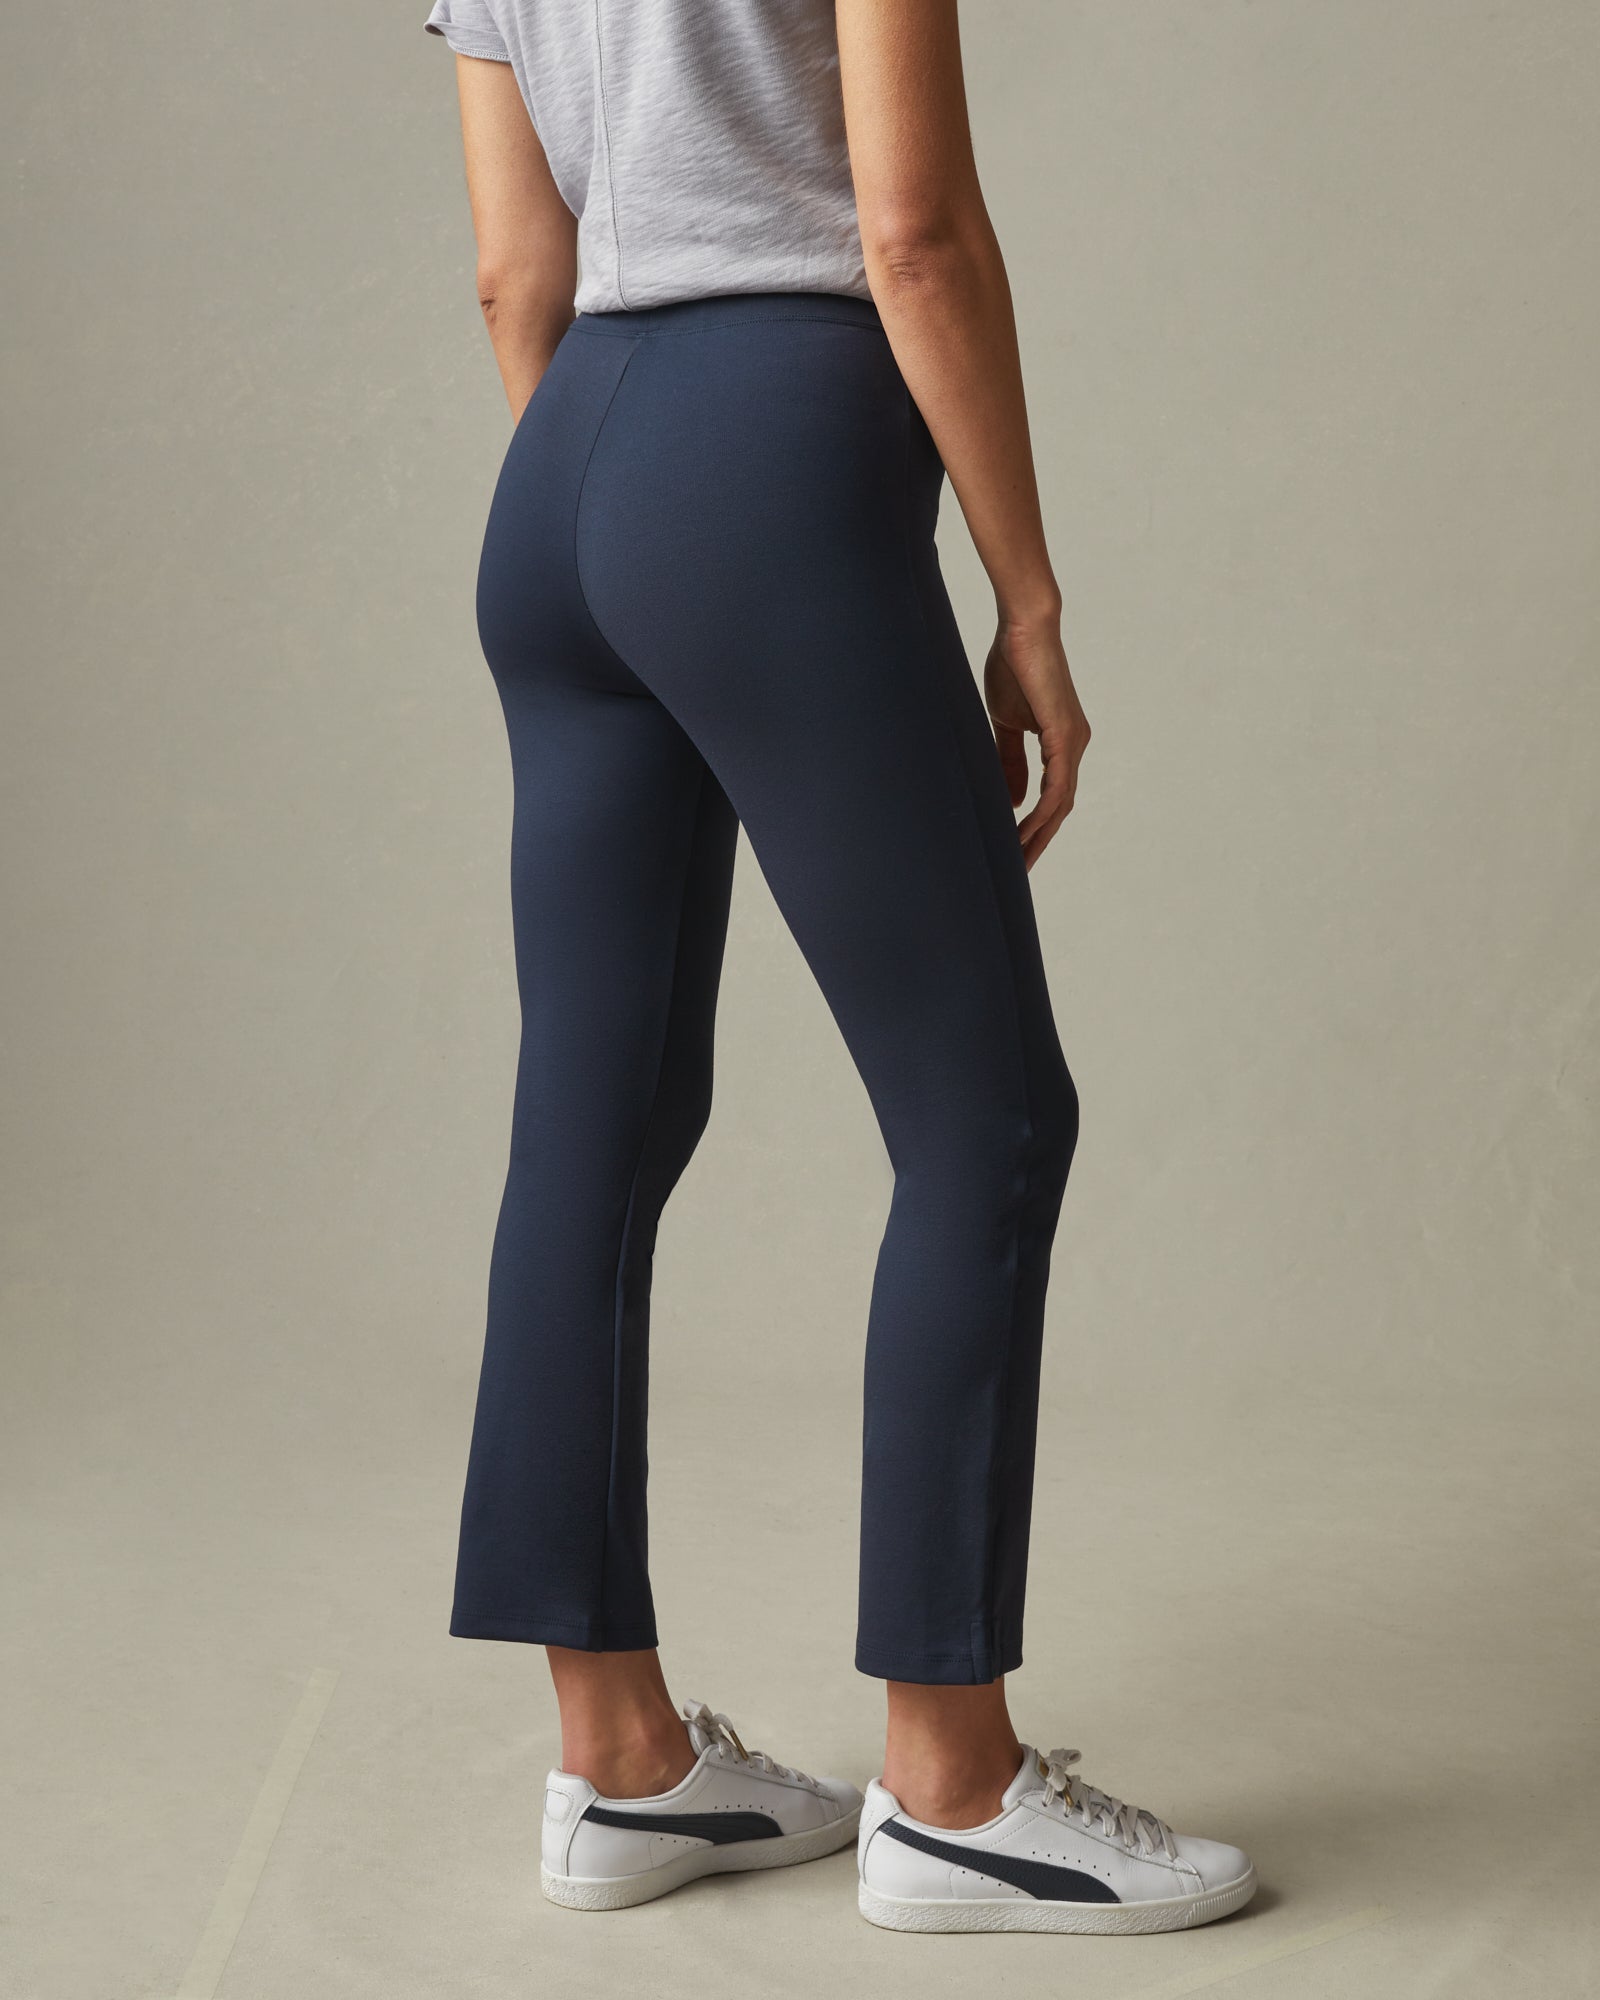 Lululemon Relaxed-Fit High-Rise Knit Cropped Pants 24 - Bone